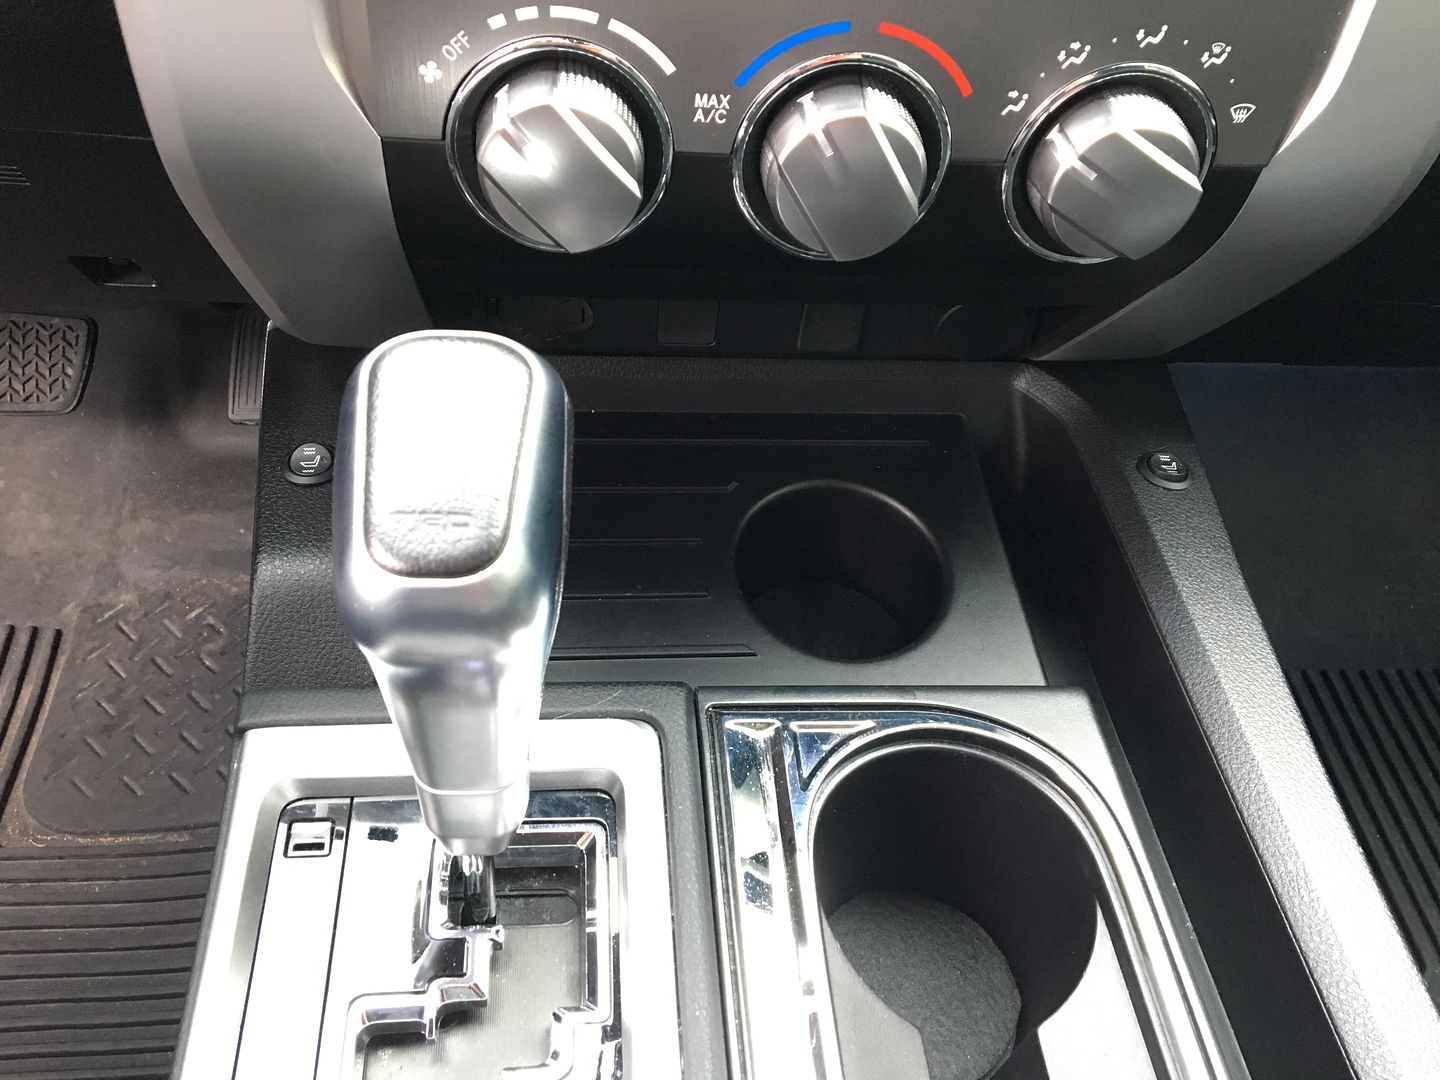 heated seats switch location | Toyota Tundra Discussion Forum